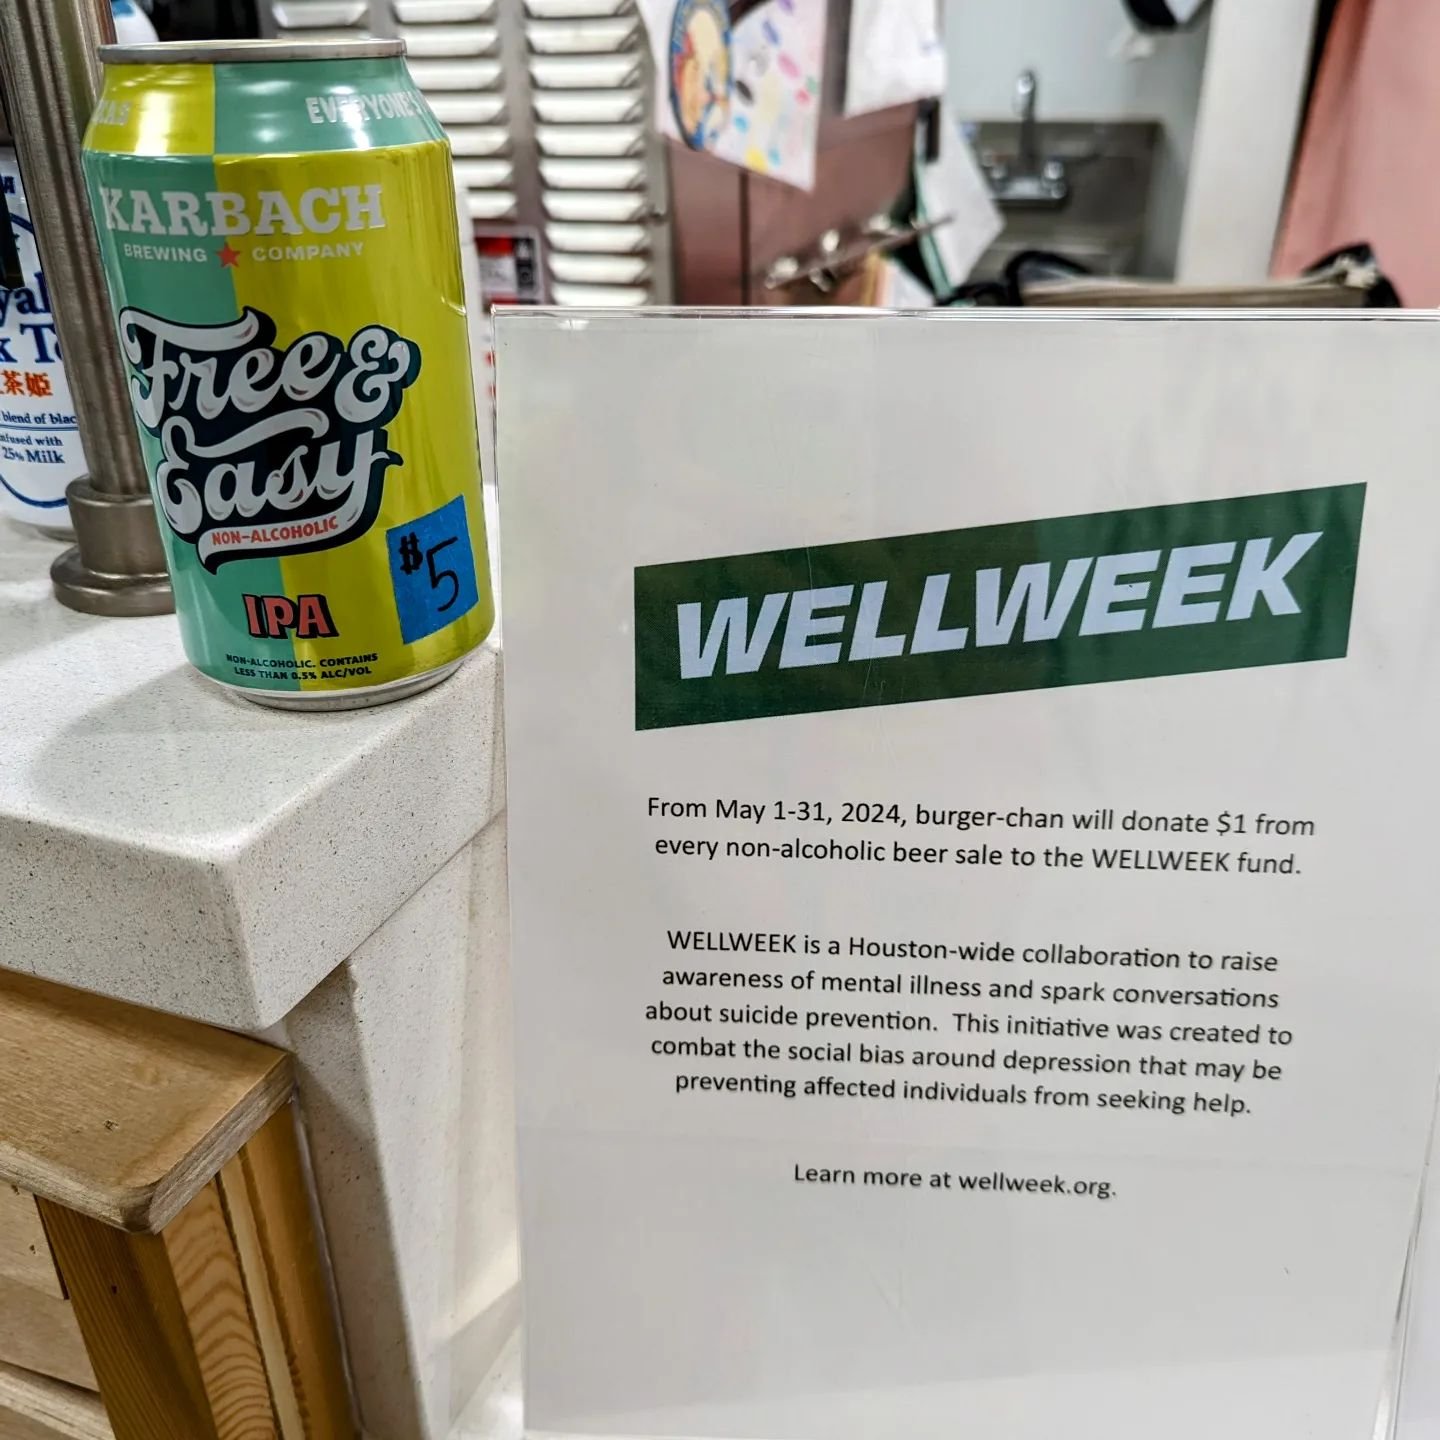 From May 1-31, 2024, burger-chan will donate $1 from every non-alcoholic beer sale to the @well_week fund.

This month's non-alcoholic beer is @karbachbrewing free &amp; easy non-alcoholic IPA.

Cheers to good moods and good foods!